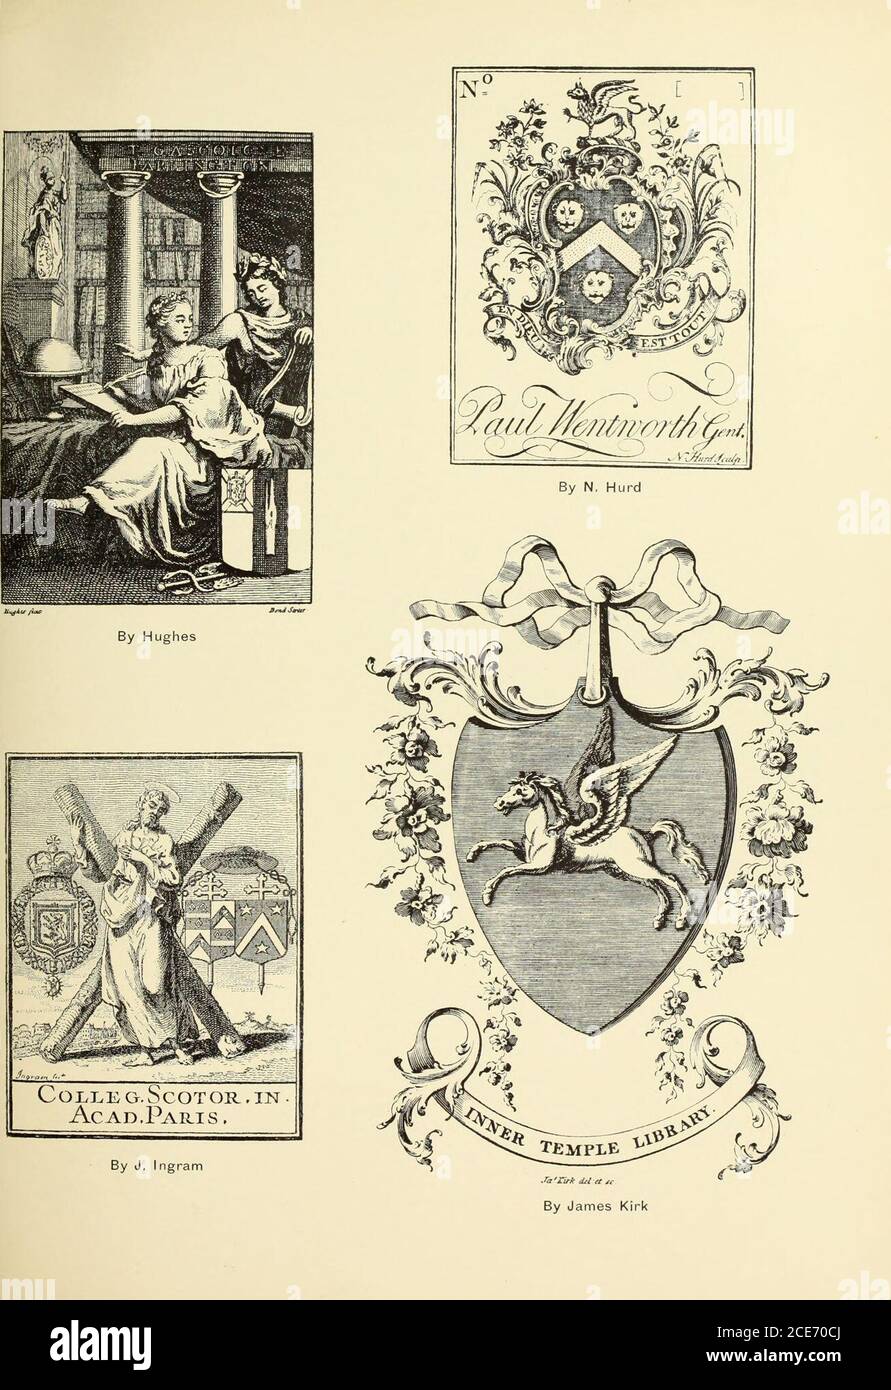 . Artists and engravers of British and American book plates : a book of reference for book plate and print collectors . ense T. G. J. Armorial I88O Alicia; Maria; Jackson. See Ladies Book Plates, T. G. J. 1894 Pictorial I894 p. 256 1894 Thoma; Graham Jackson, 1894 T. G. J. Pictorial Alex. Waldemar Lawrence An. JEt. 21 18 Maii, 1895 T. G. ]. Pictorial IS95 Caroli Lancelotti Shadwell T. G. J. 1896 Pictorial I896 Collegii ^Vadhami in Acad. Oxon 1. vj. J . I094 ± KJl 11 cxllo Ul t8o7 Jackson (W.), London the founders Robert Bloomfield, 1815. See Ex Libris Journal, W. Jackson sc. Gutter Lane, Cheap Stock Photo